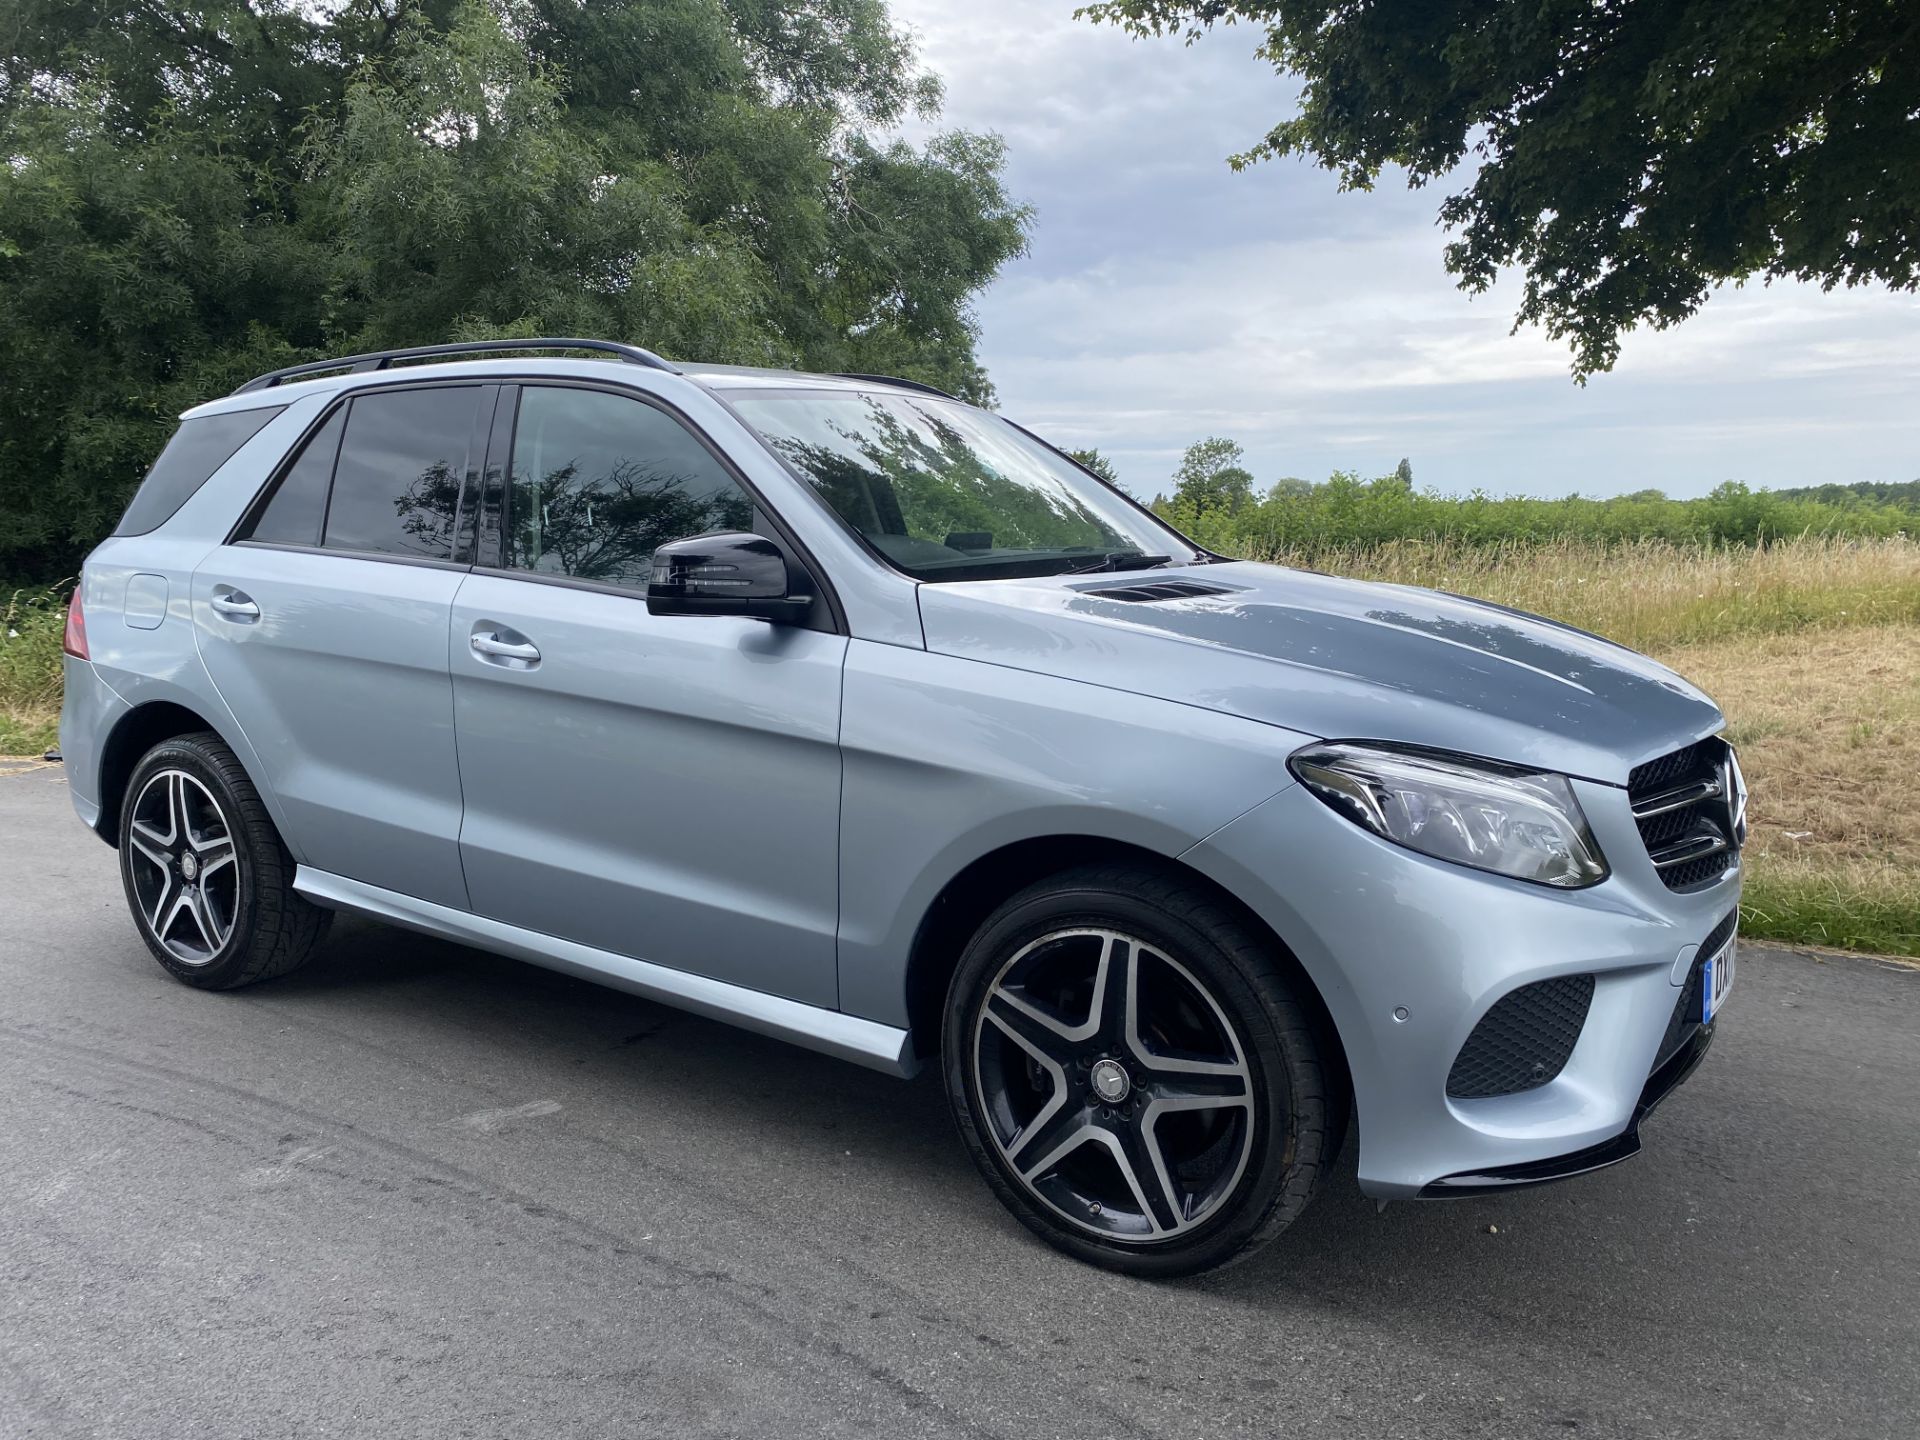 MERCEDES GLE 250d AMG-LINE "NIGHT EDITION" AUTO - 17 REG - 1 OWNER - FULL LEATHER - COMAND - NO VAT!